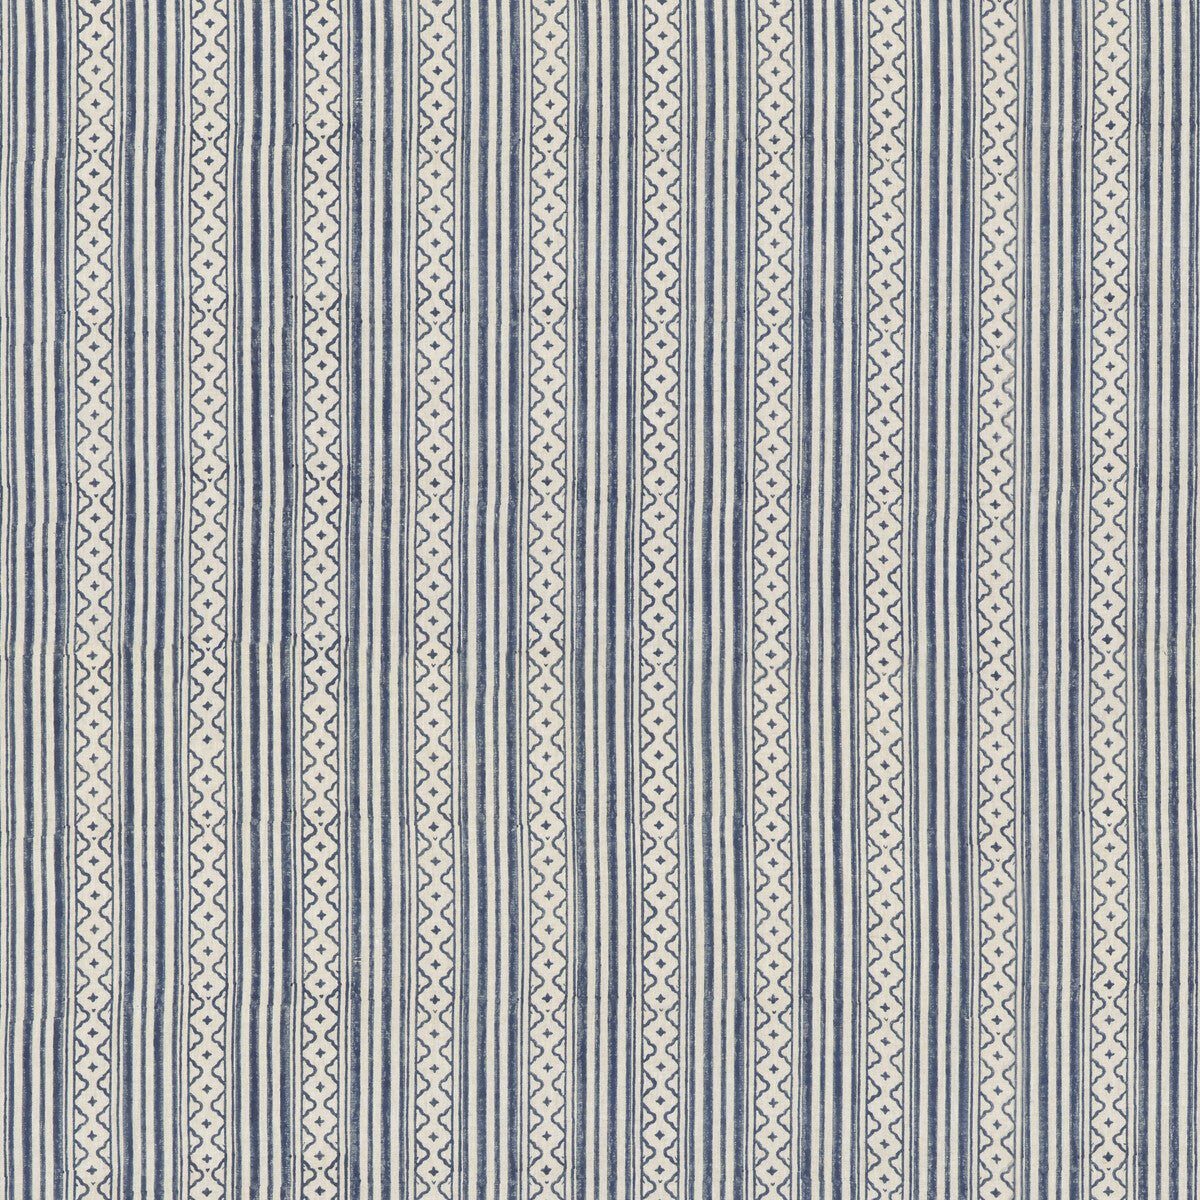 Ebury Stripe fabric in blue color - pattern BP10914.1.0 - by G P &amp; J Baker in the Portobello collection